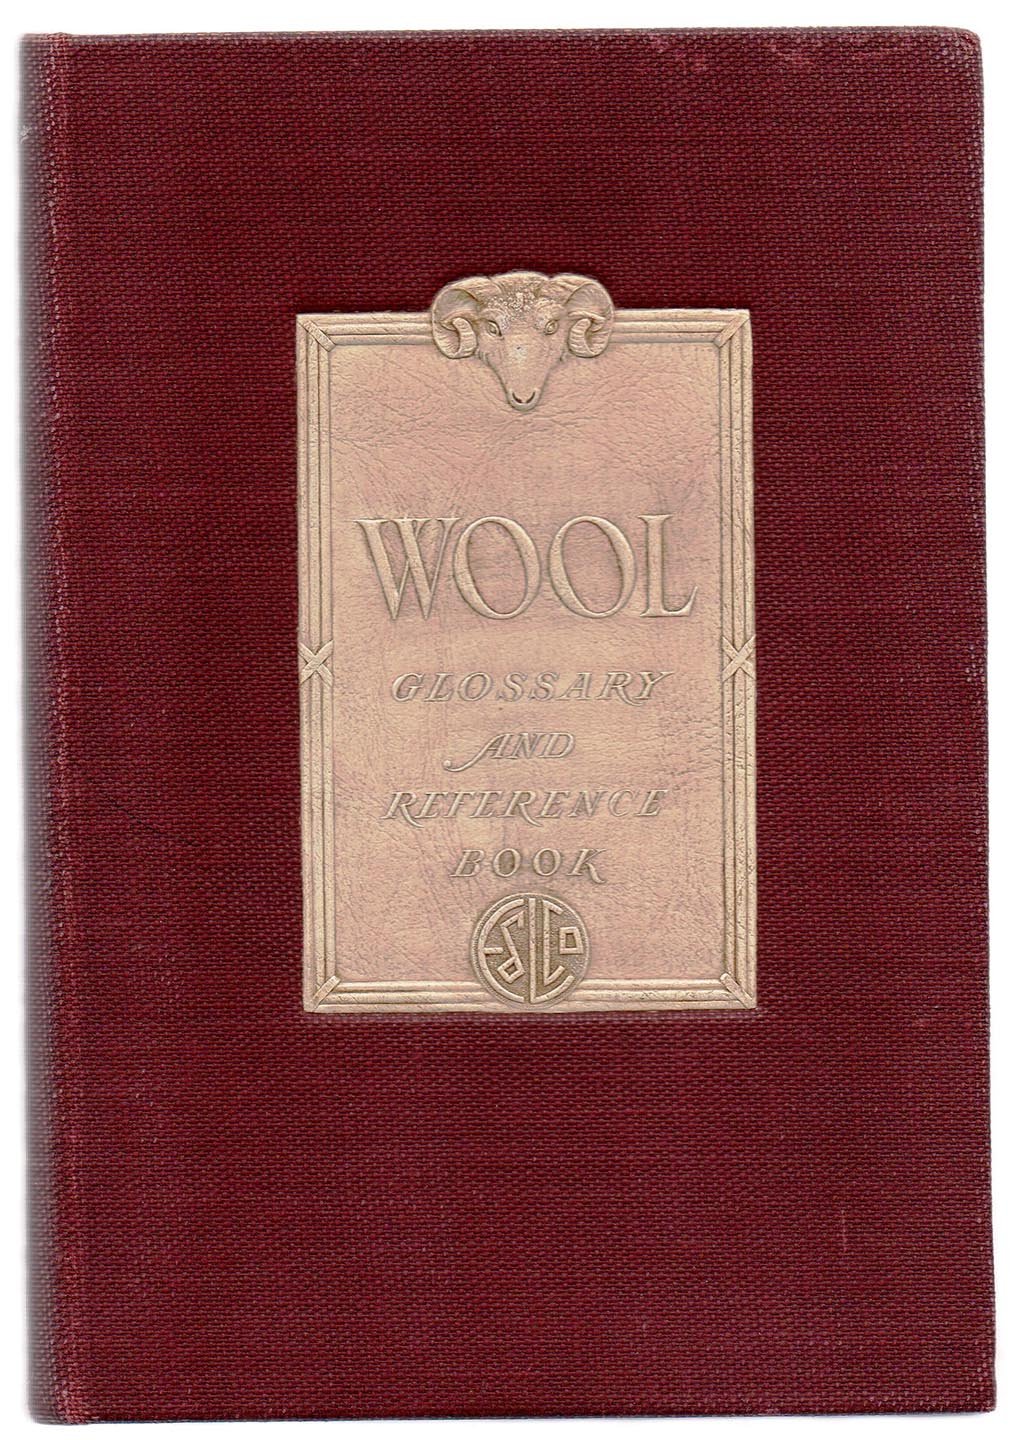 Wool Glossary and Reference Book